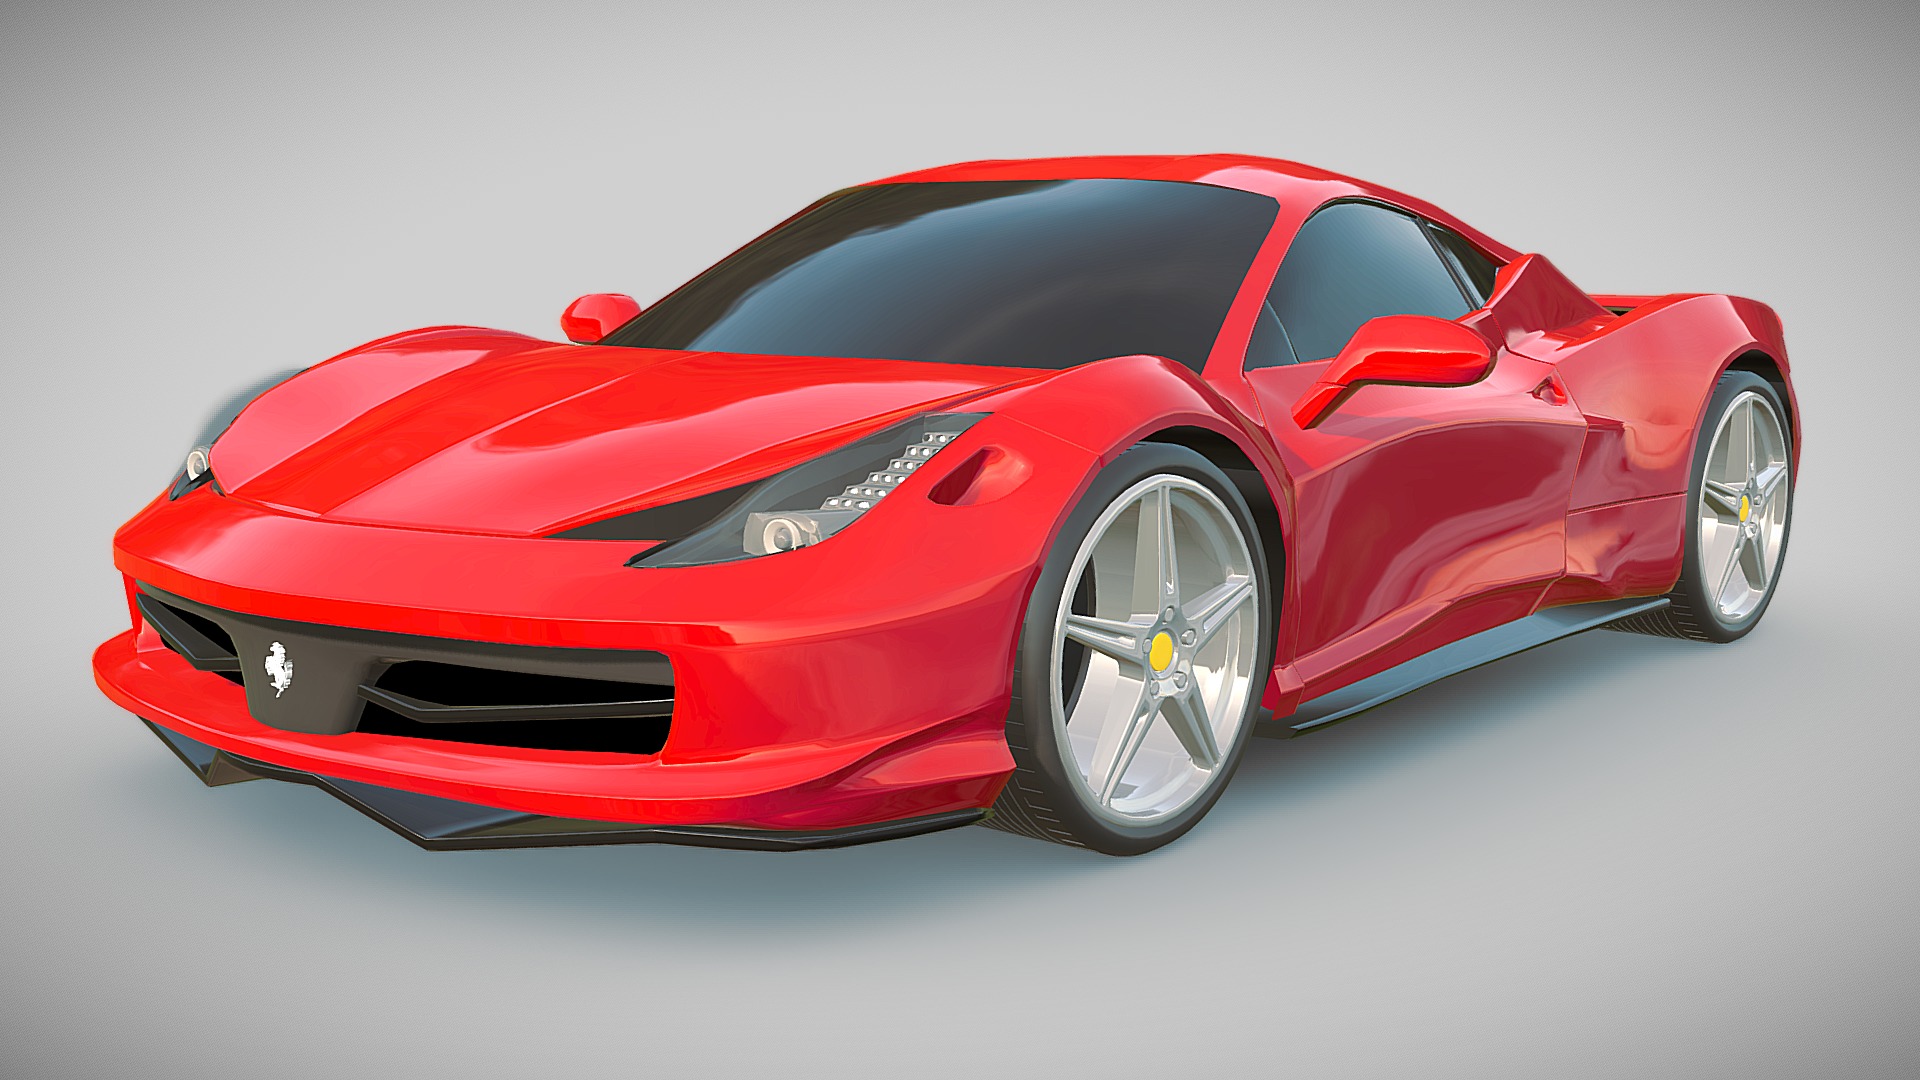 3d model created with blender3d 2.49b.Objects are separated.Tire treads  created from polygons.There are no interior objects for this product.There are textures for grill panels and for the rear lights. Enjoy my product.

obj file
verts: 297297
polys: 219622 - Ferrari 458 Italia supercar redesign - 3D model by koleos3d 3d model